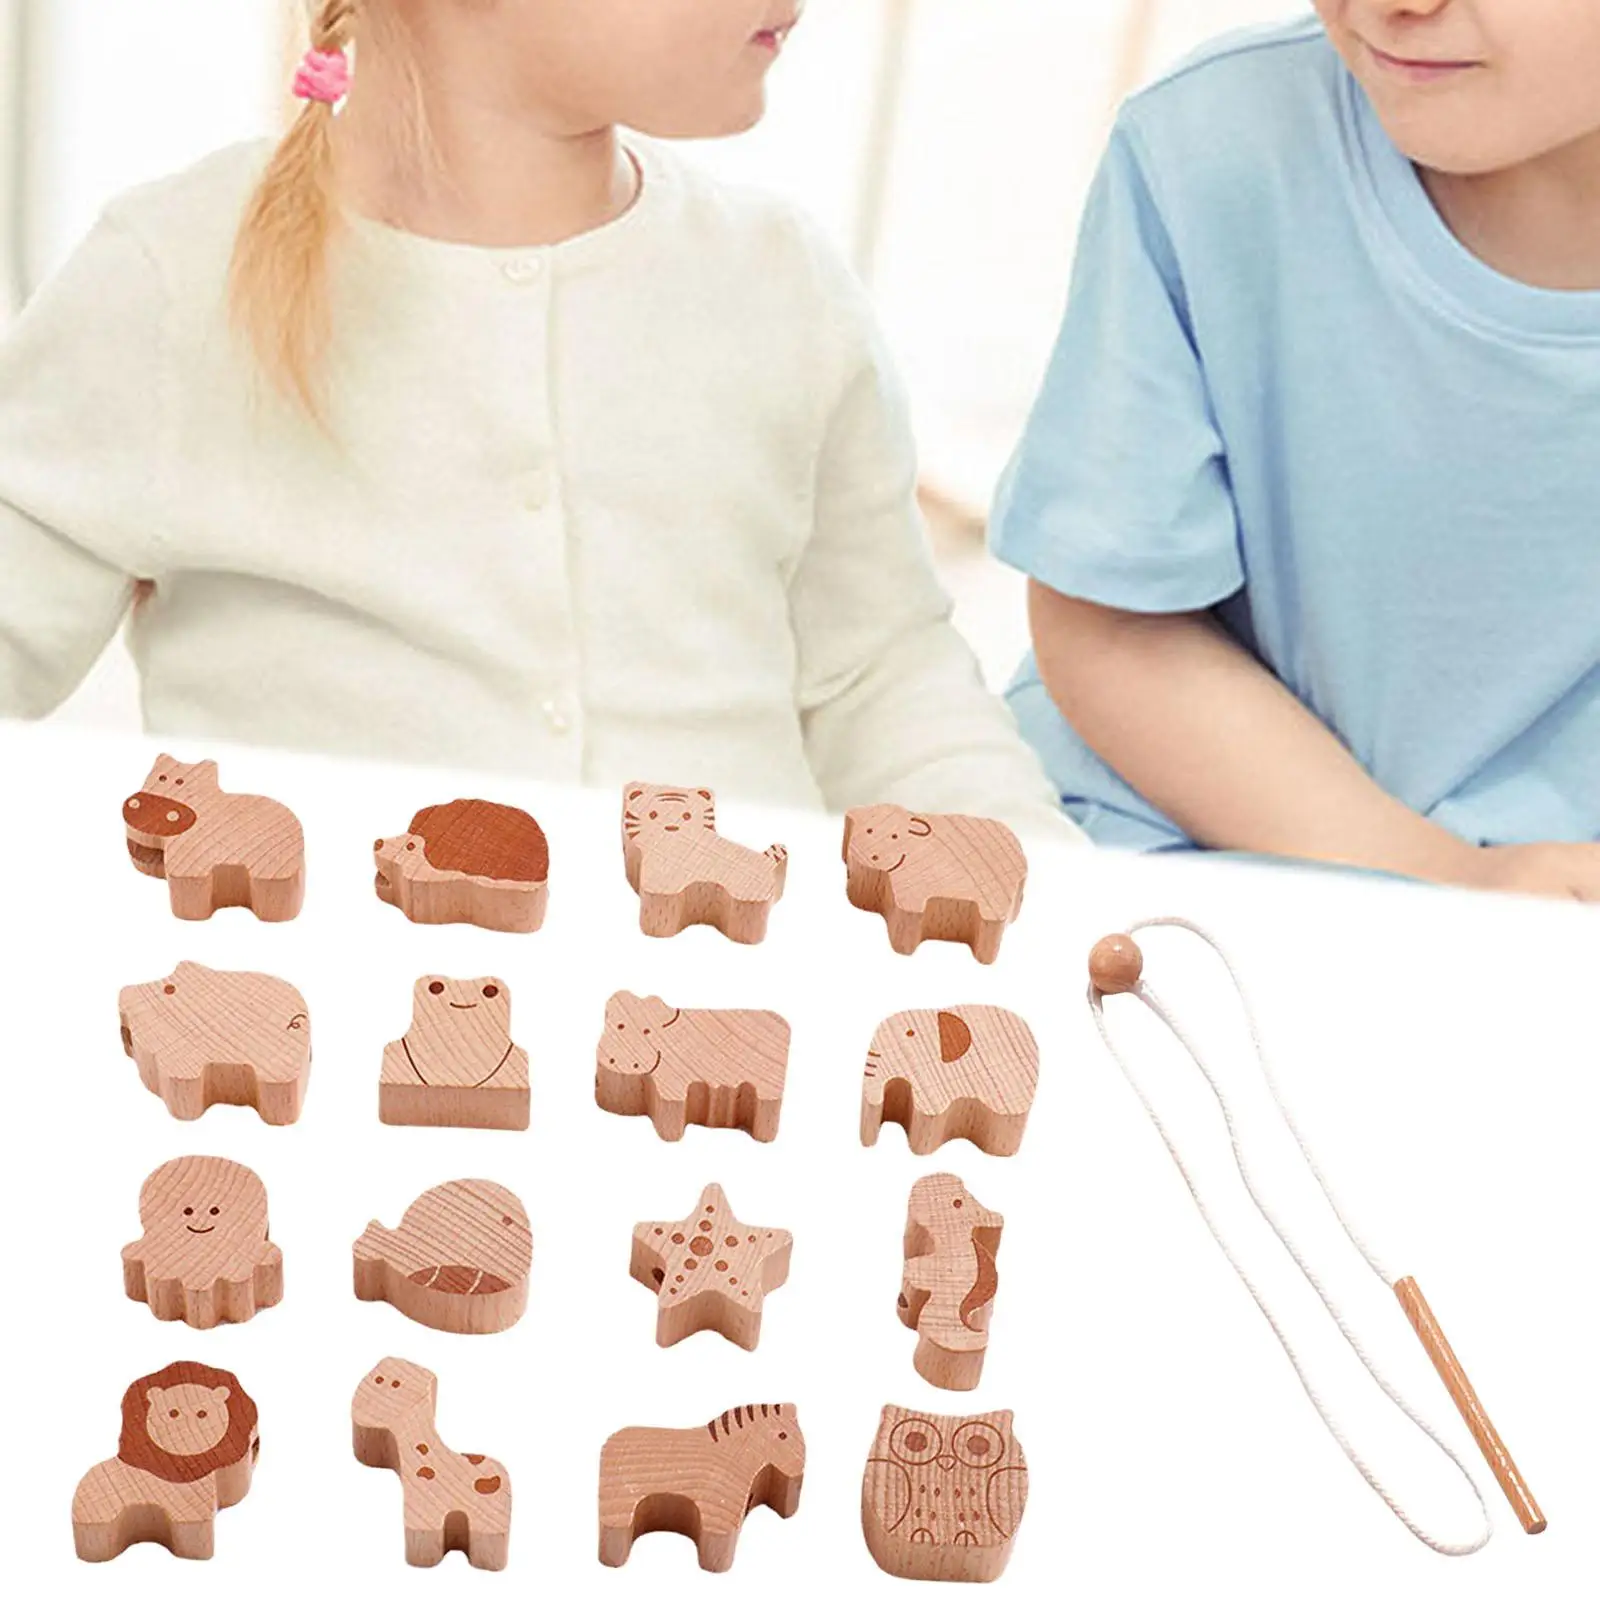 Wooden Lacing Beads Toys Early Educational Toy for Children Holiday Gifts